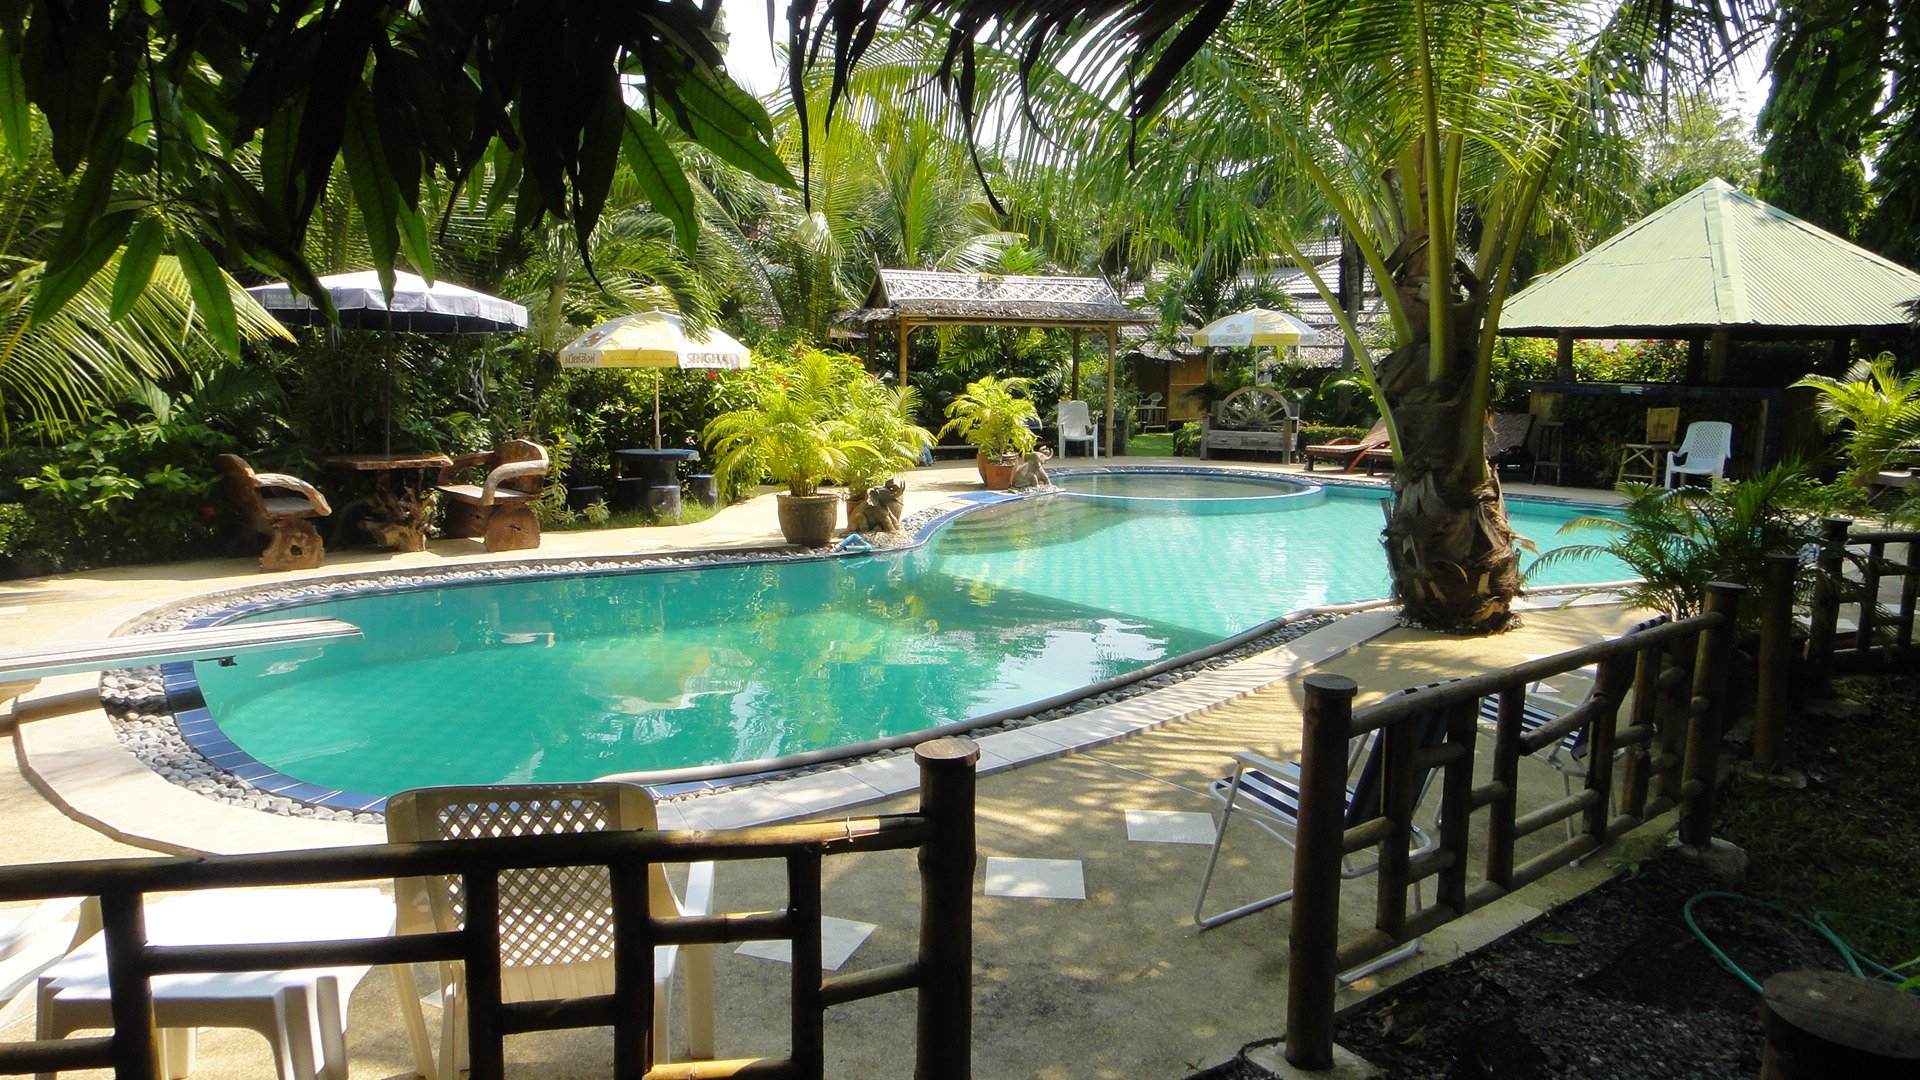 Villa with 9 bed and bathrooms in Rawai Phuket